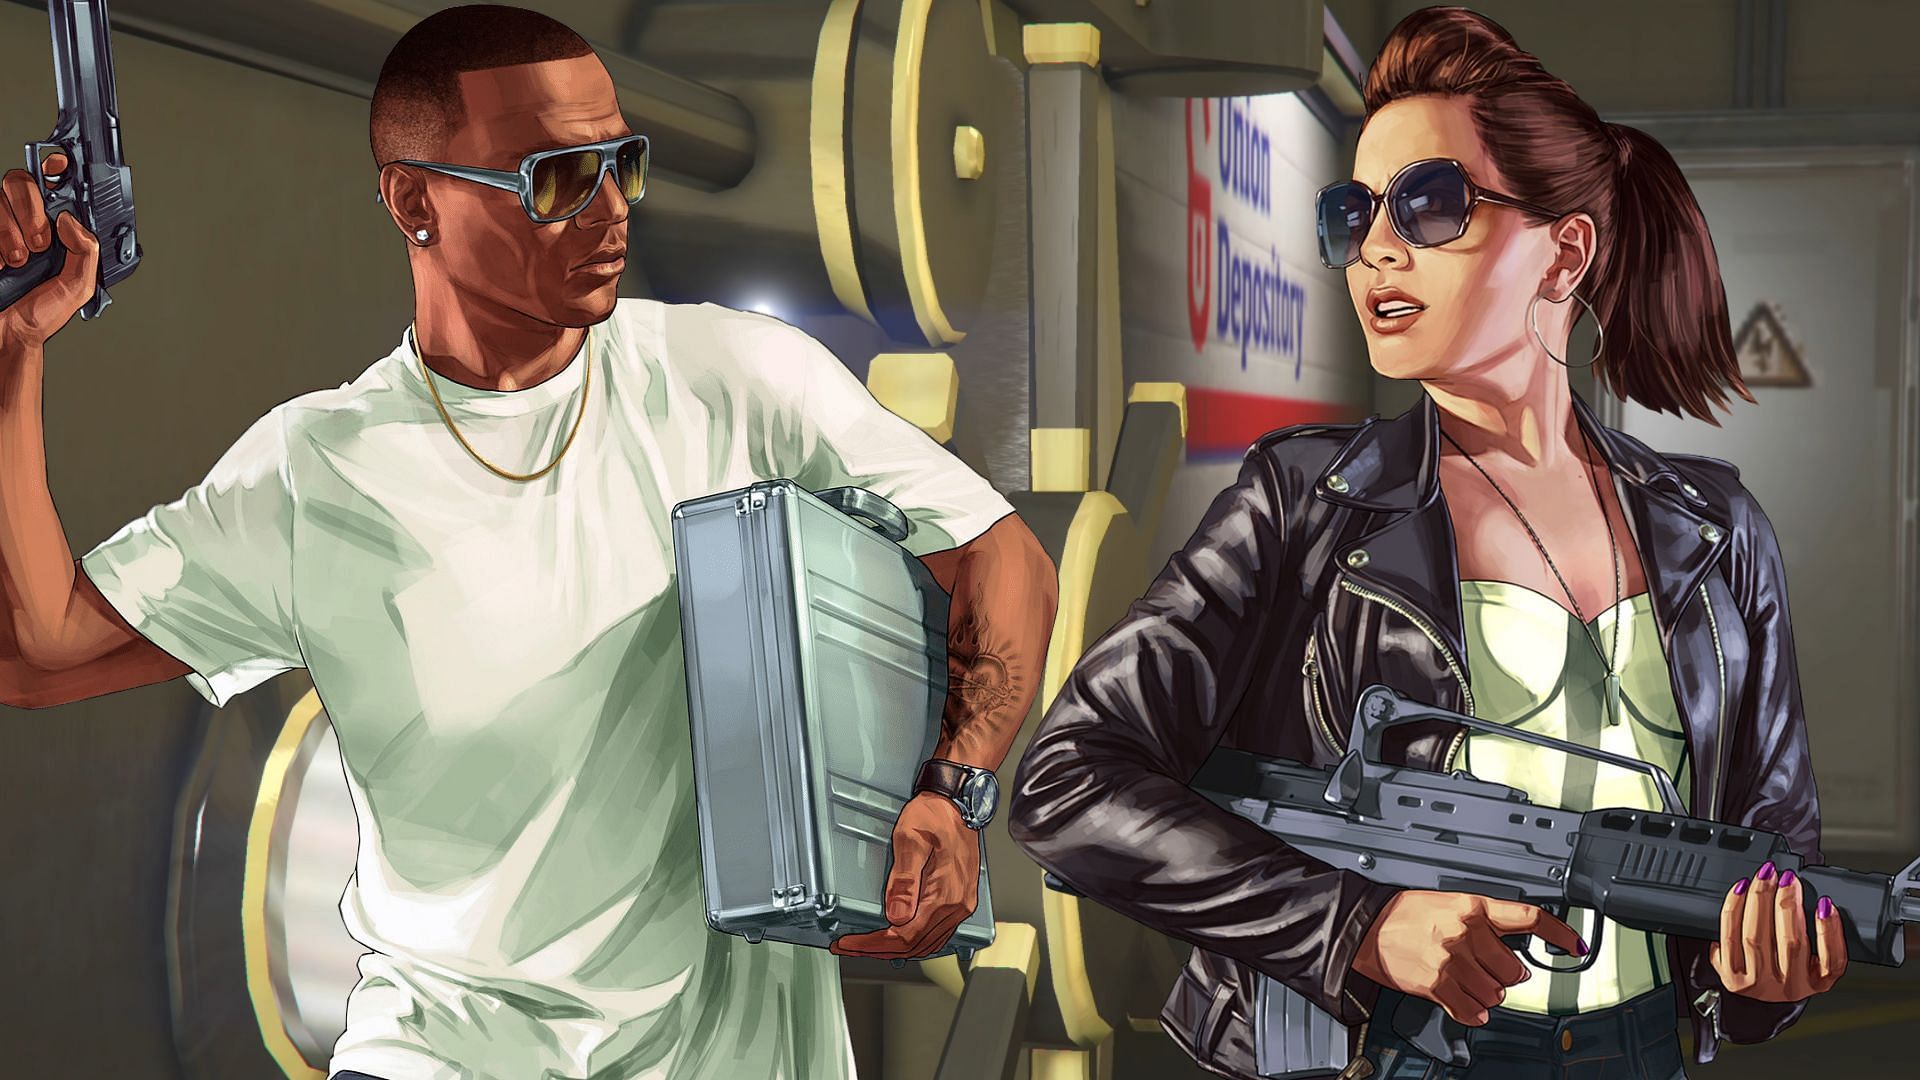 The Union Depository Contract pays more than any other Robbery Contract in GTA Online (Image via Rockstar Games)